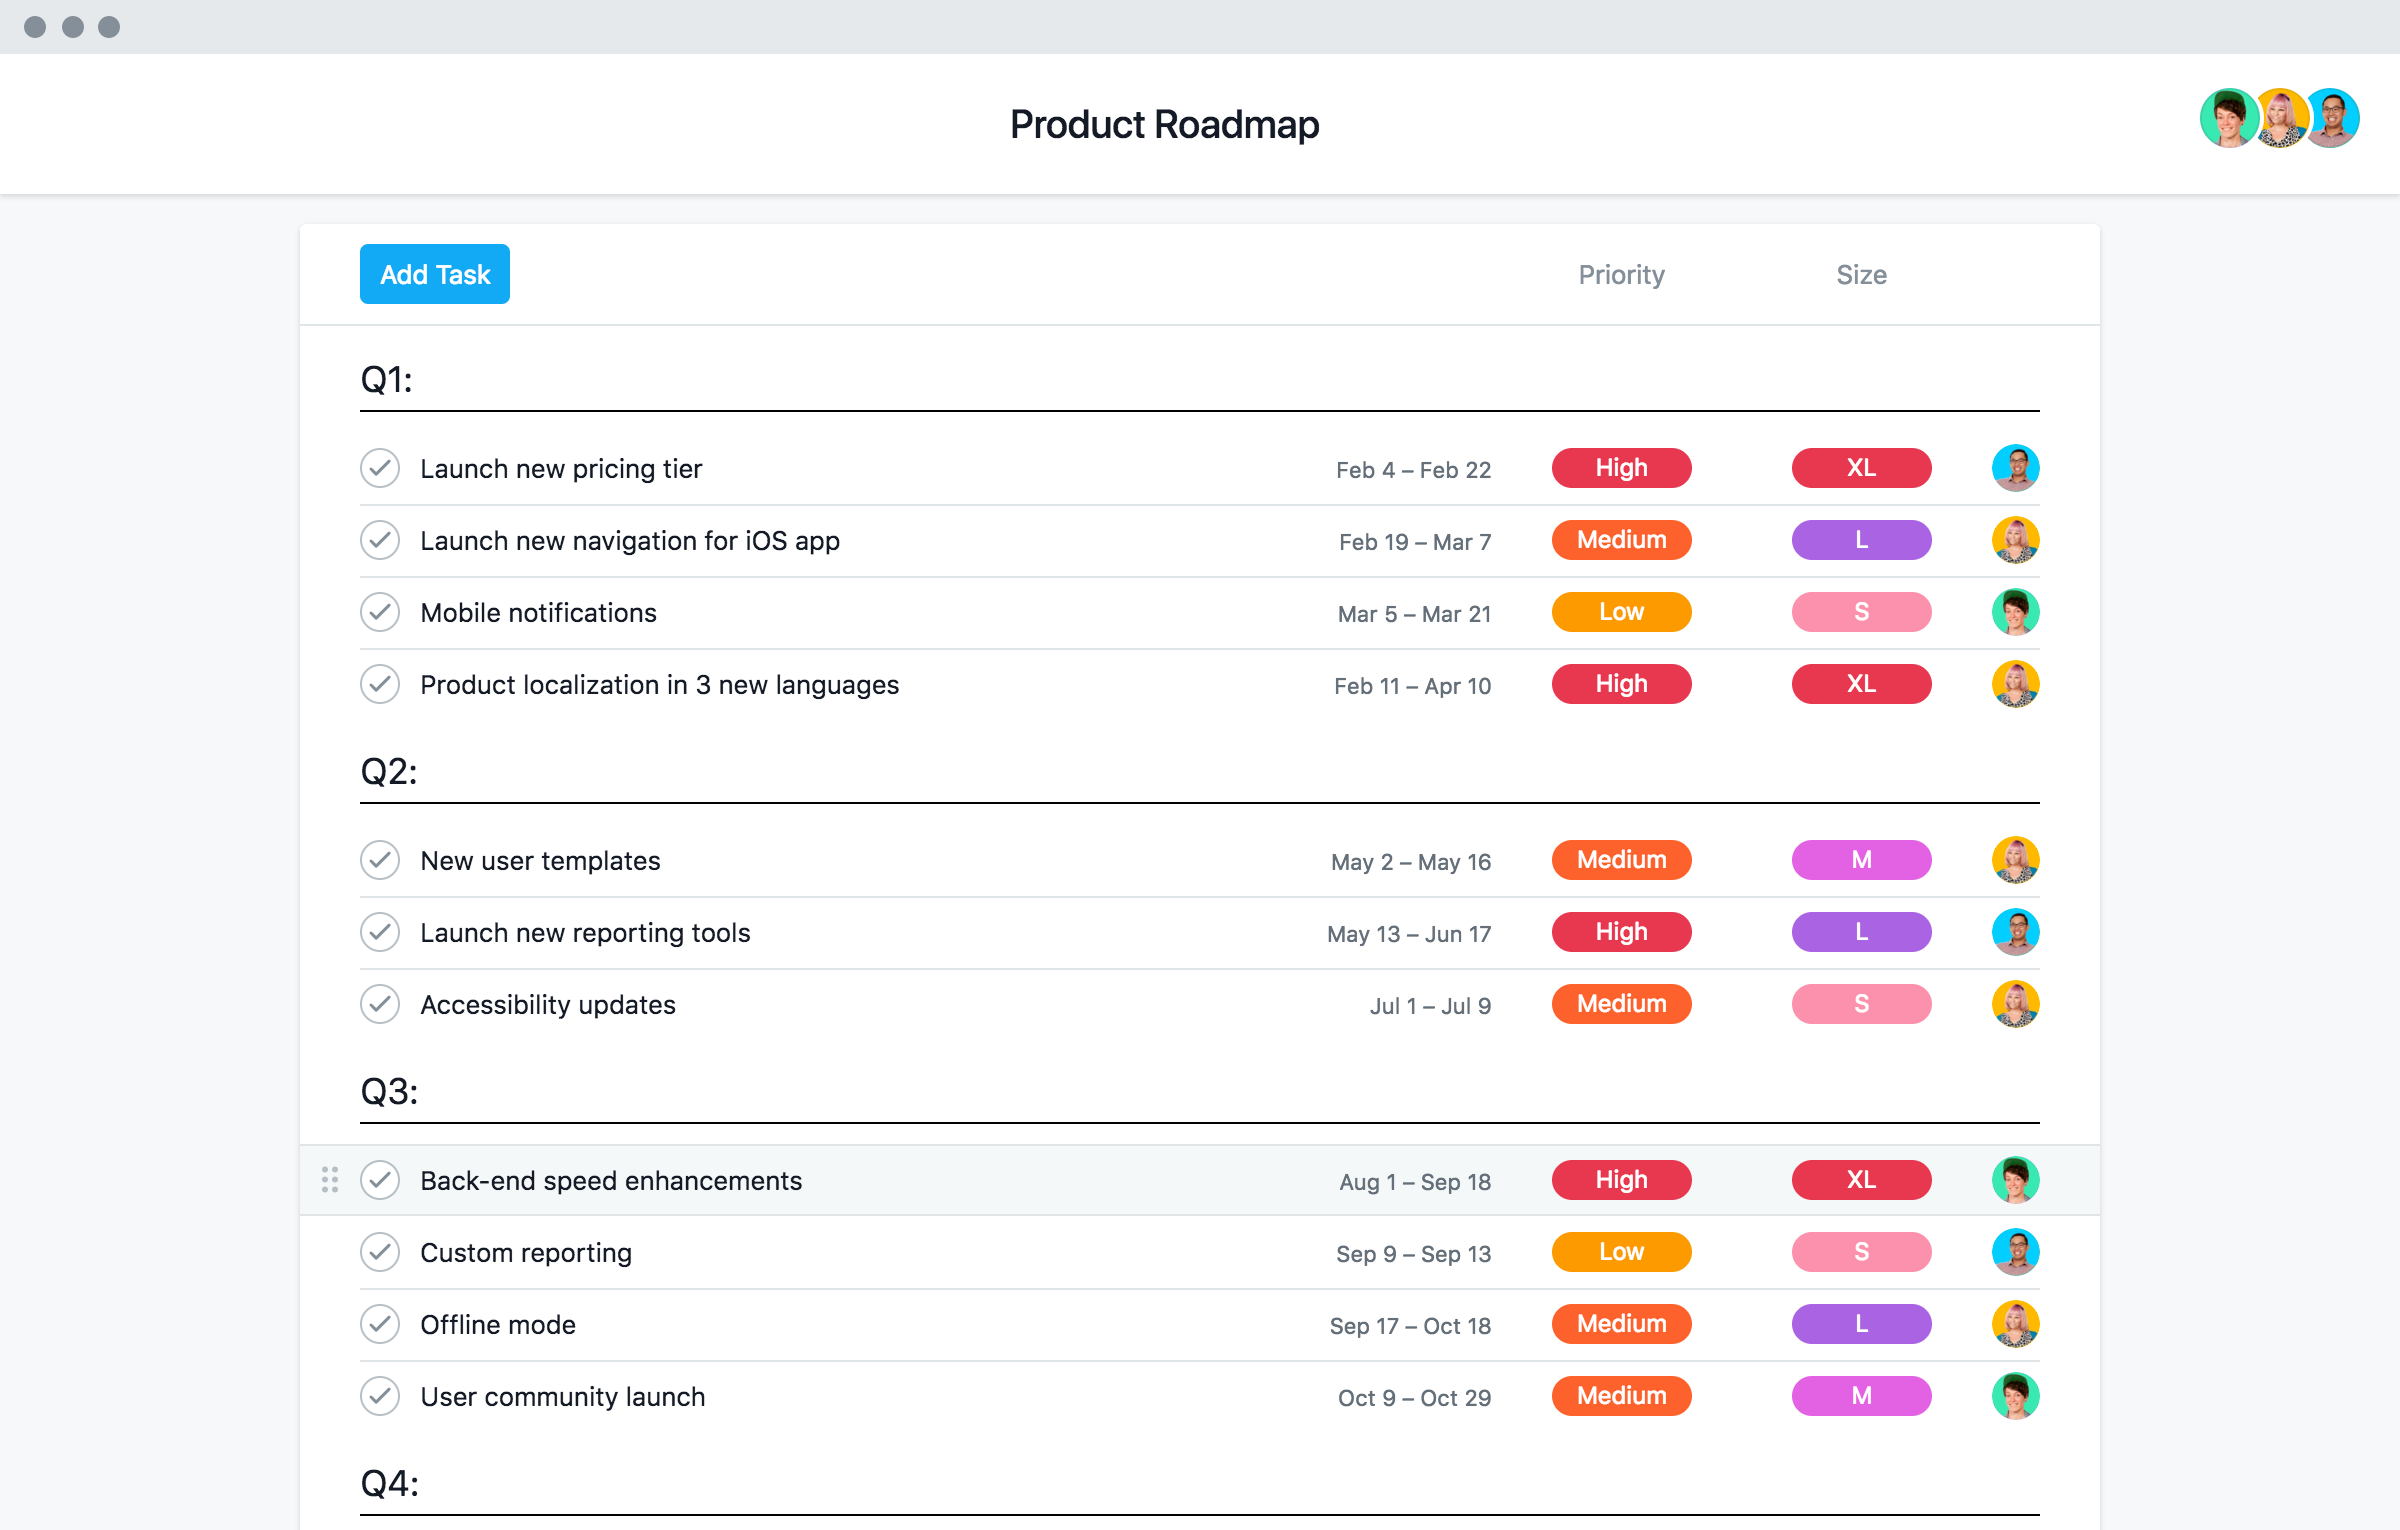 [Old product ui] Product roadmap template in Asana, spreadsheet-style project view (List)